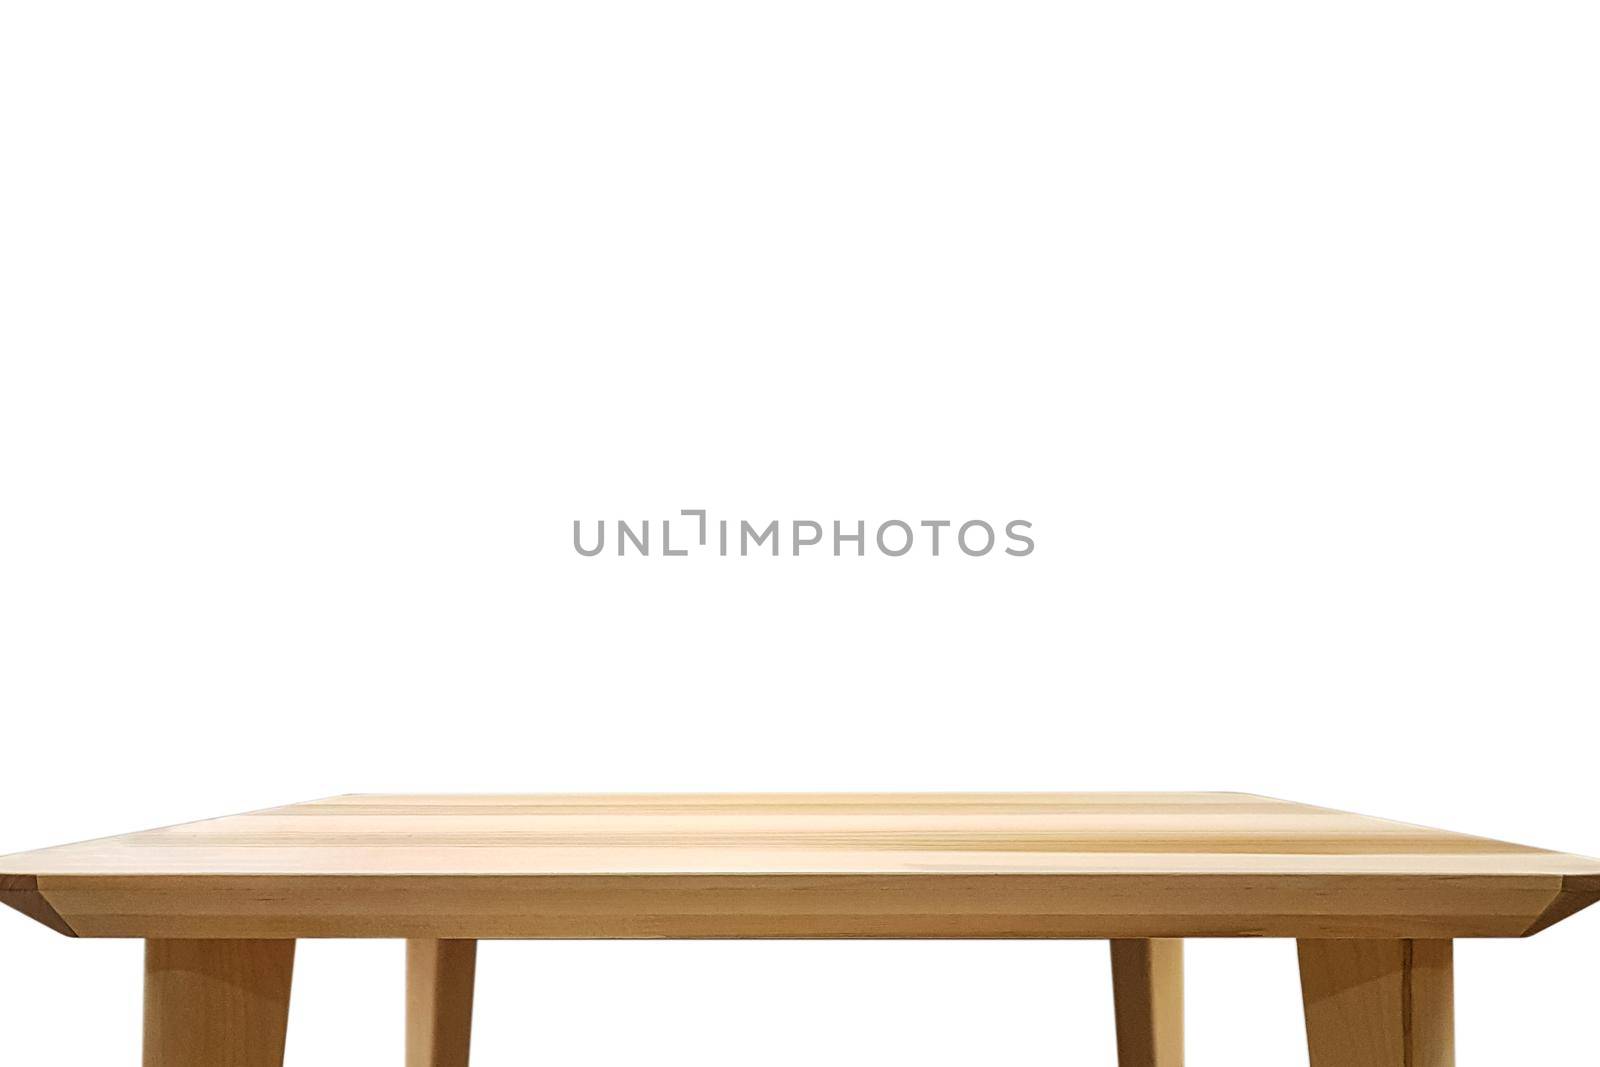 Empty wooden table by wdnet_studio